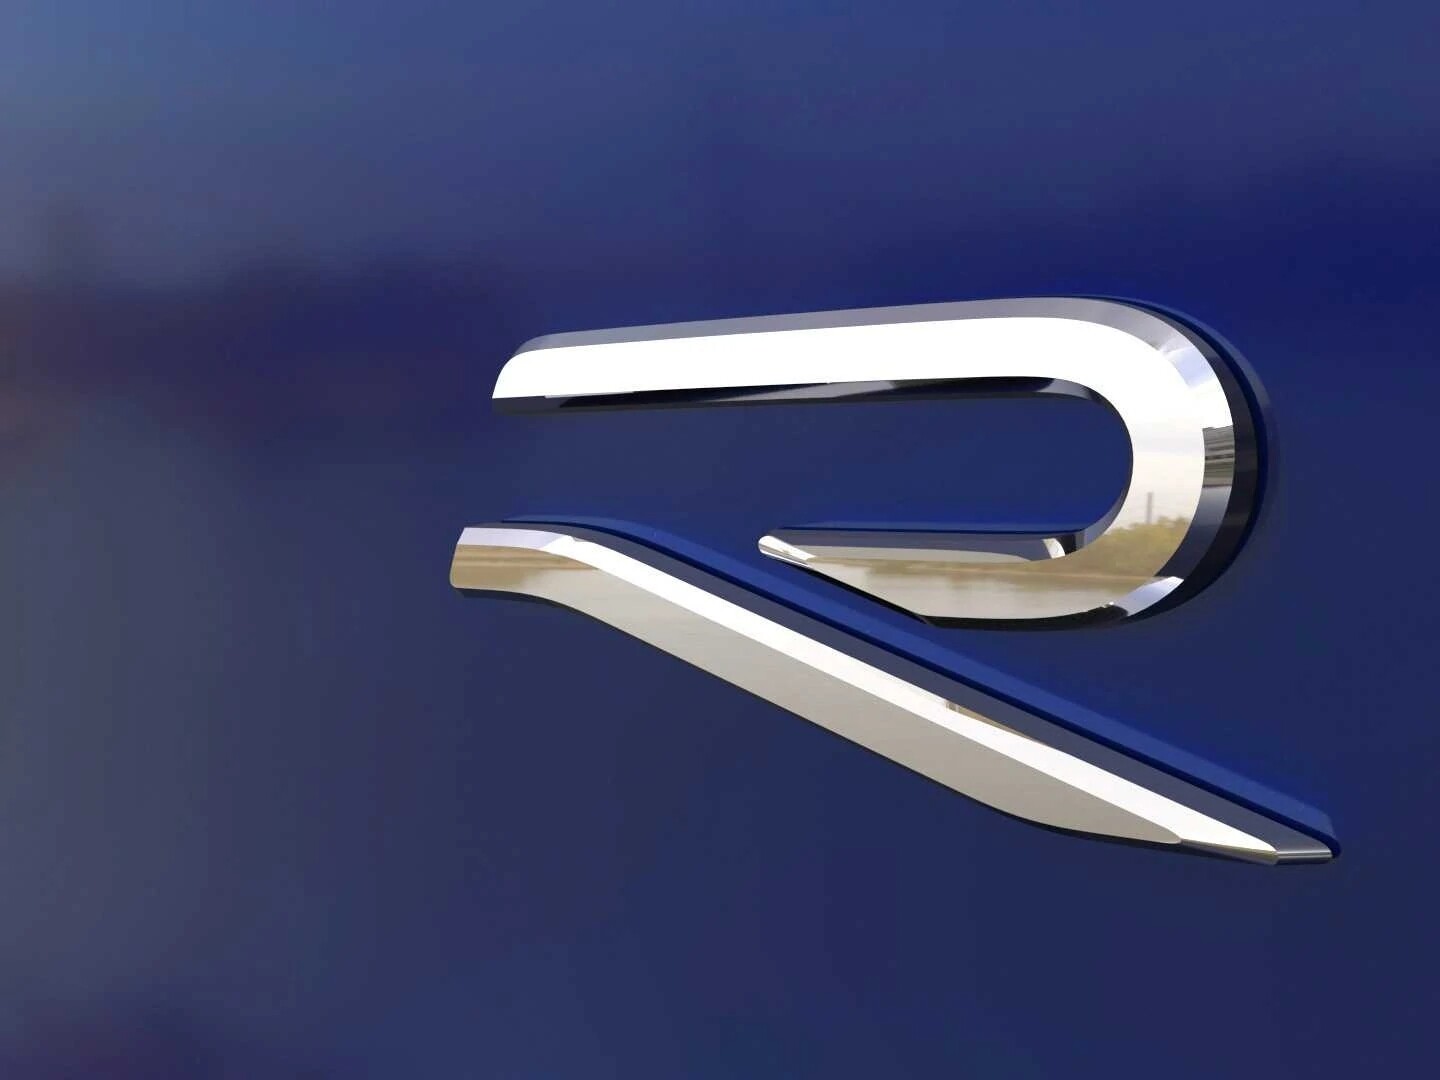 R R-Line RLine new volkswagen Silver boot trunk badge emblem adhesive stick on